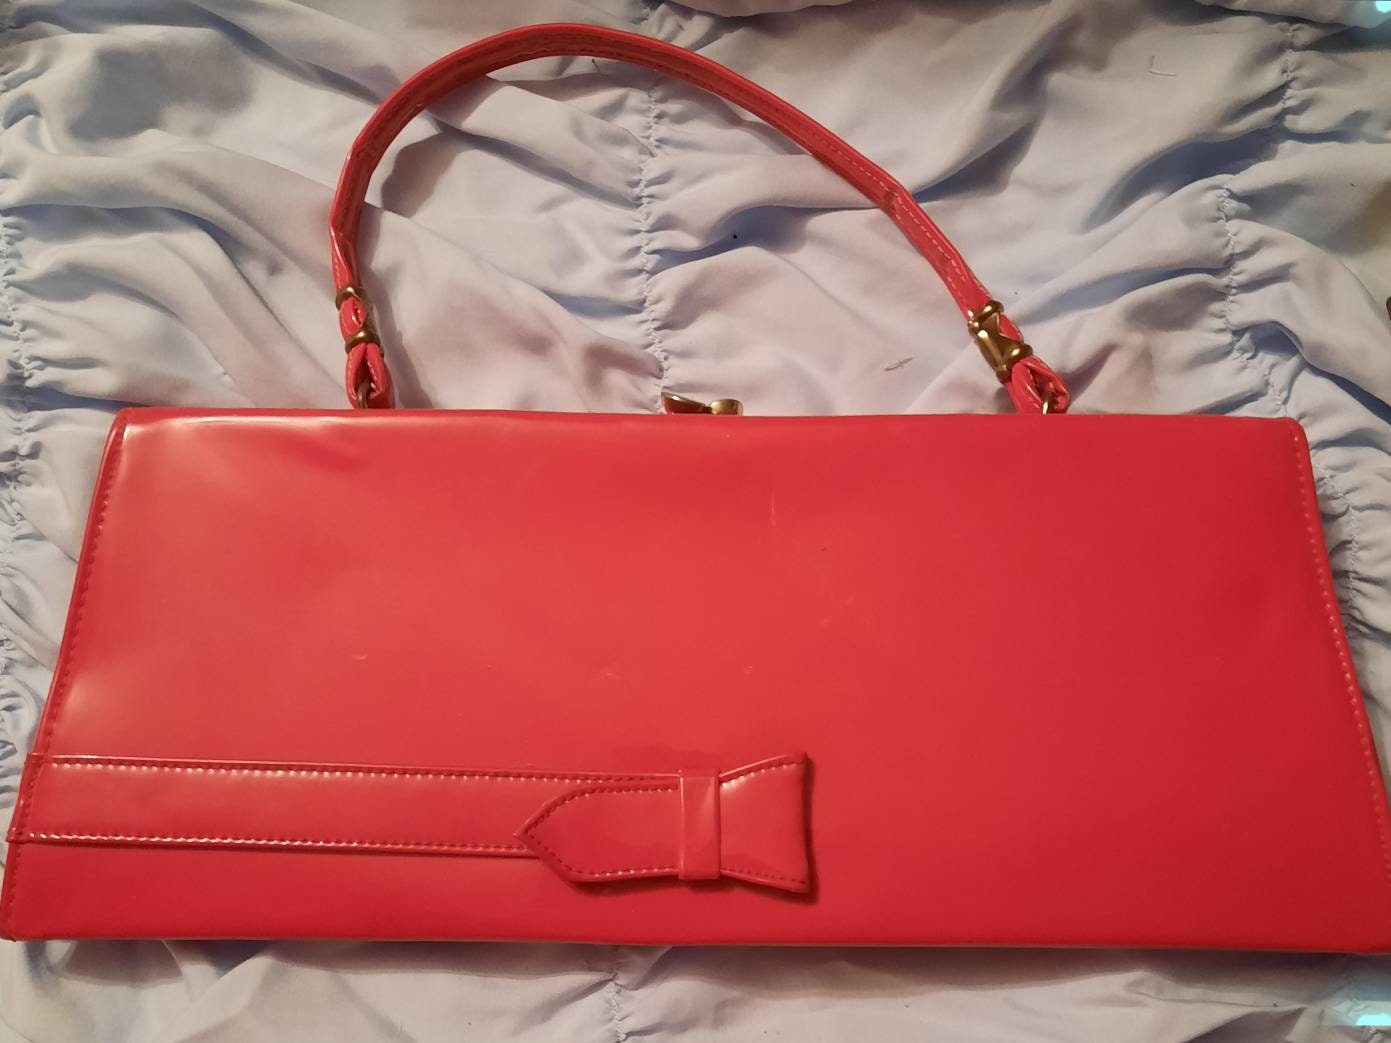 Authentic KATE SPADE Red Patent Leather Purse/Handbag with Storage Bag - New